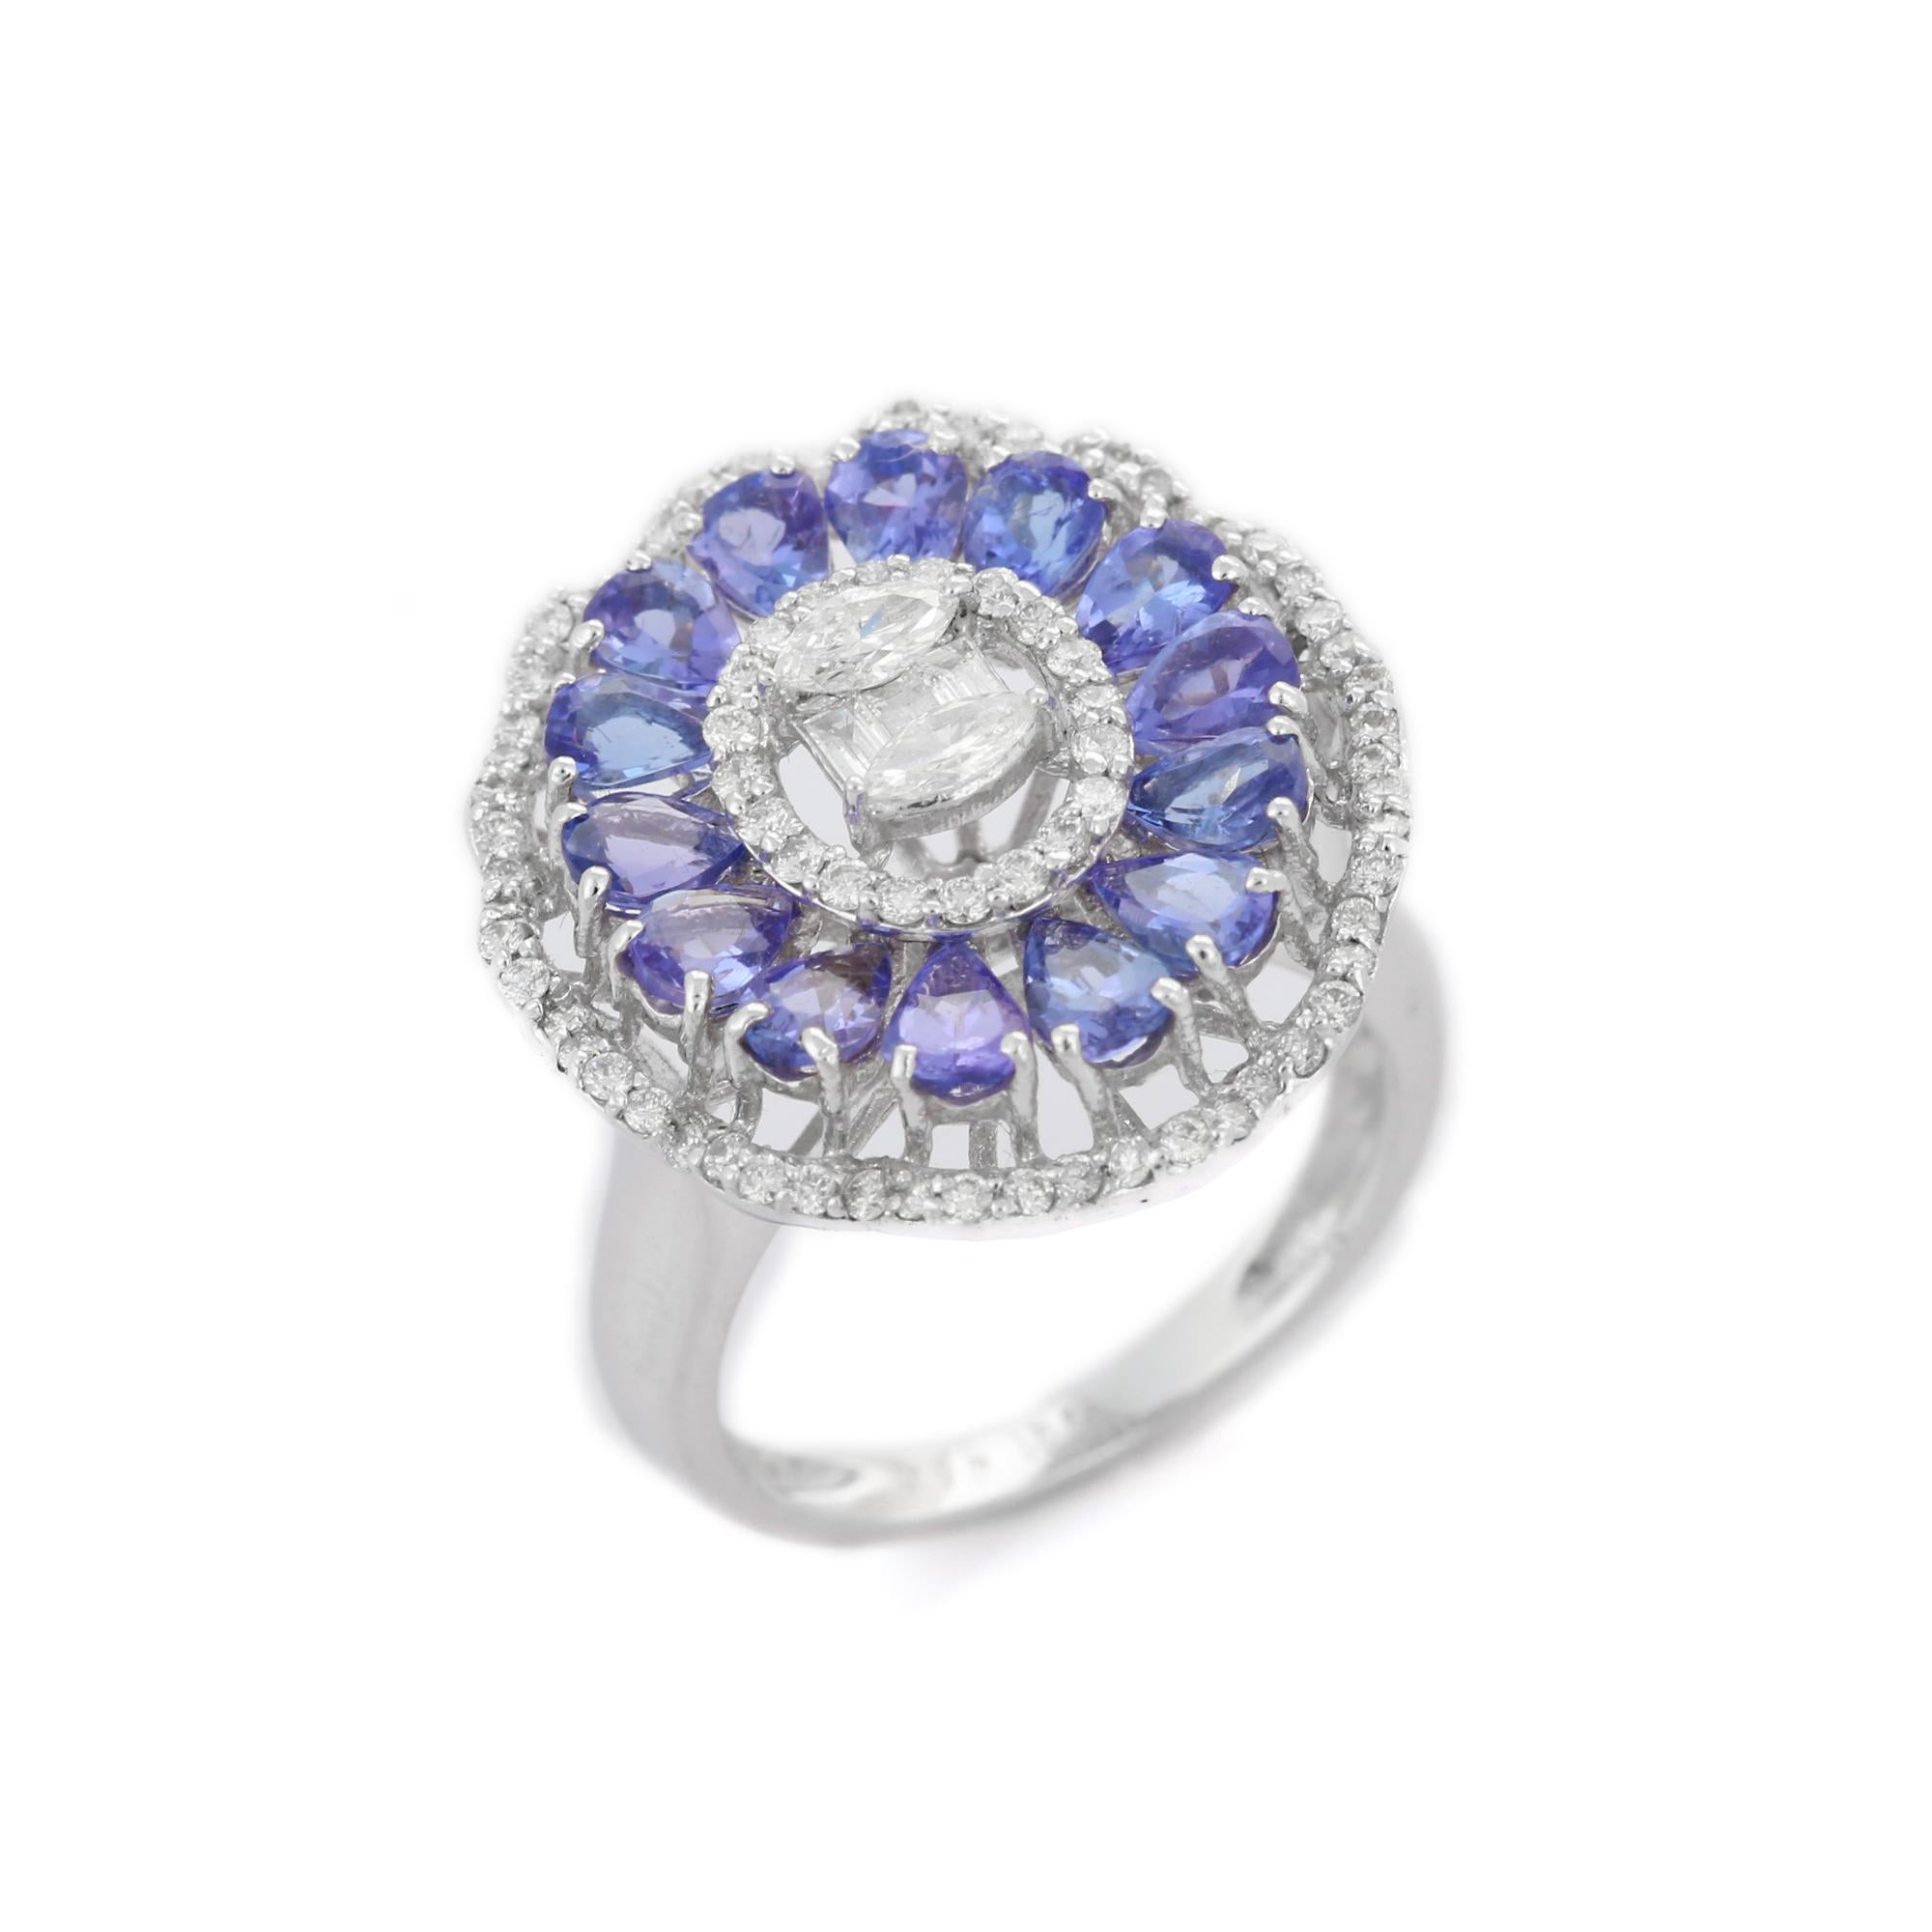 For Sale:  18K White Gold 2.26 ct Blue Sapphire Floral Cocktail Wedding Ring with Diamonds 5